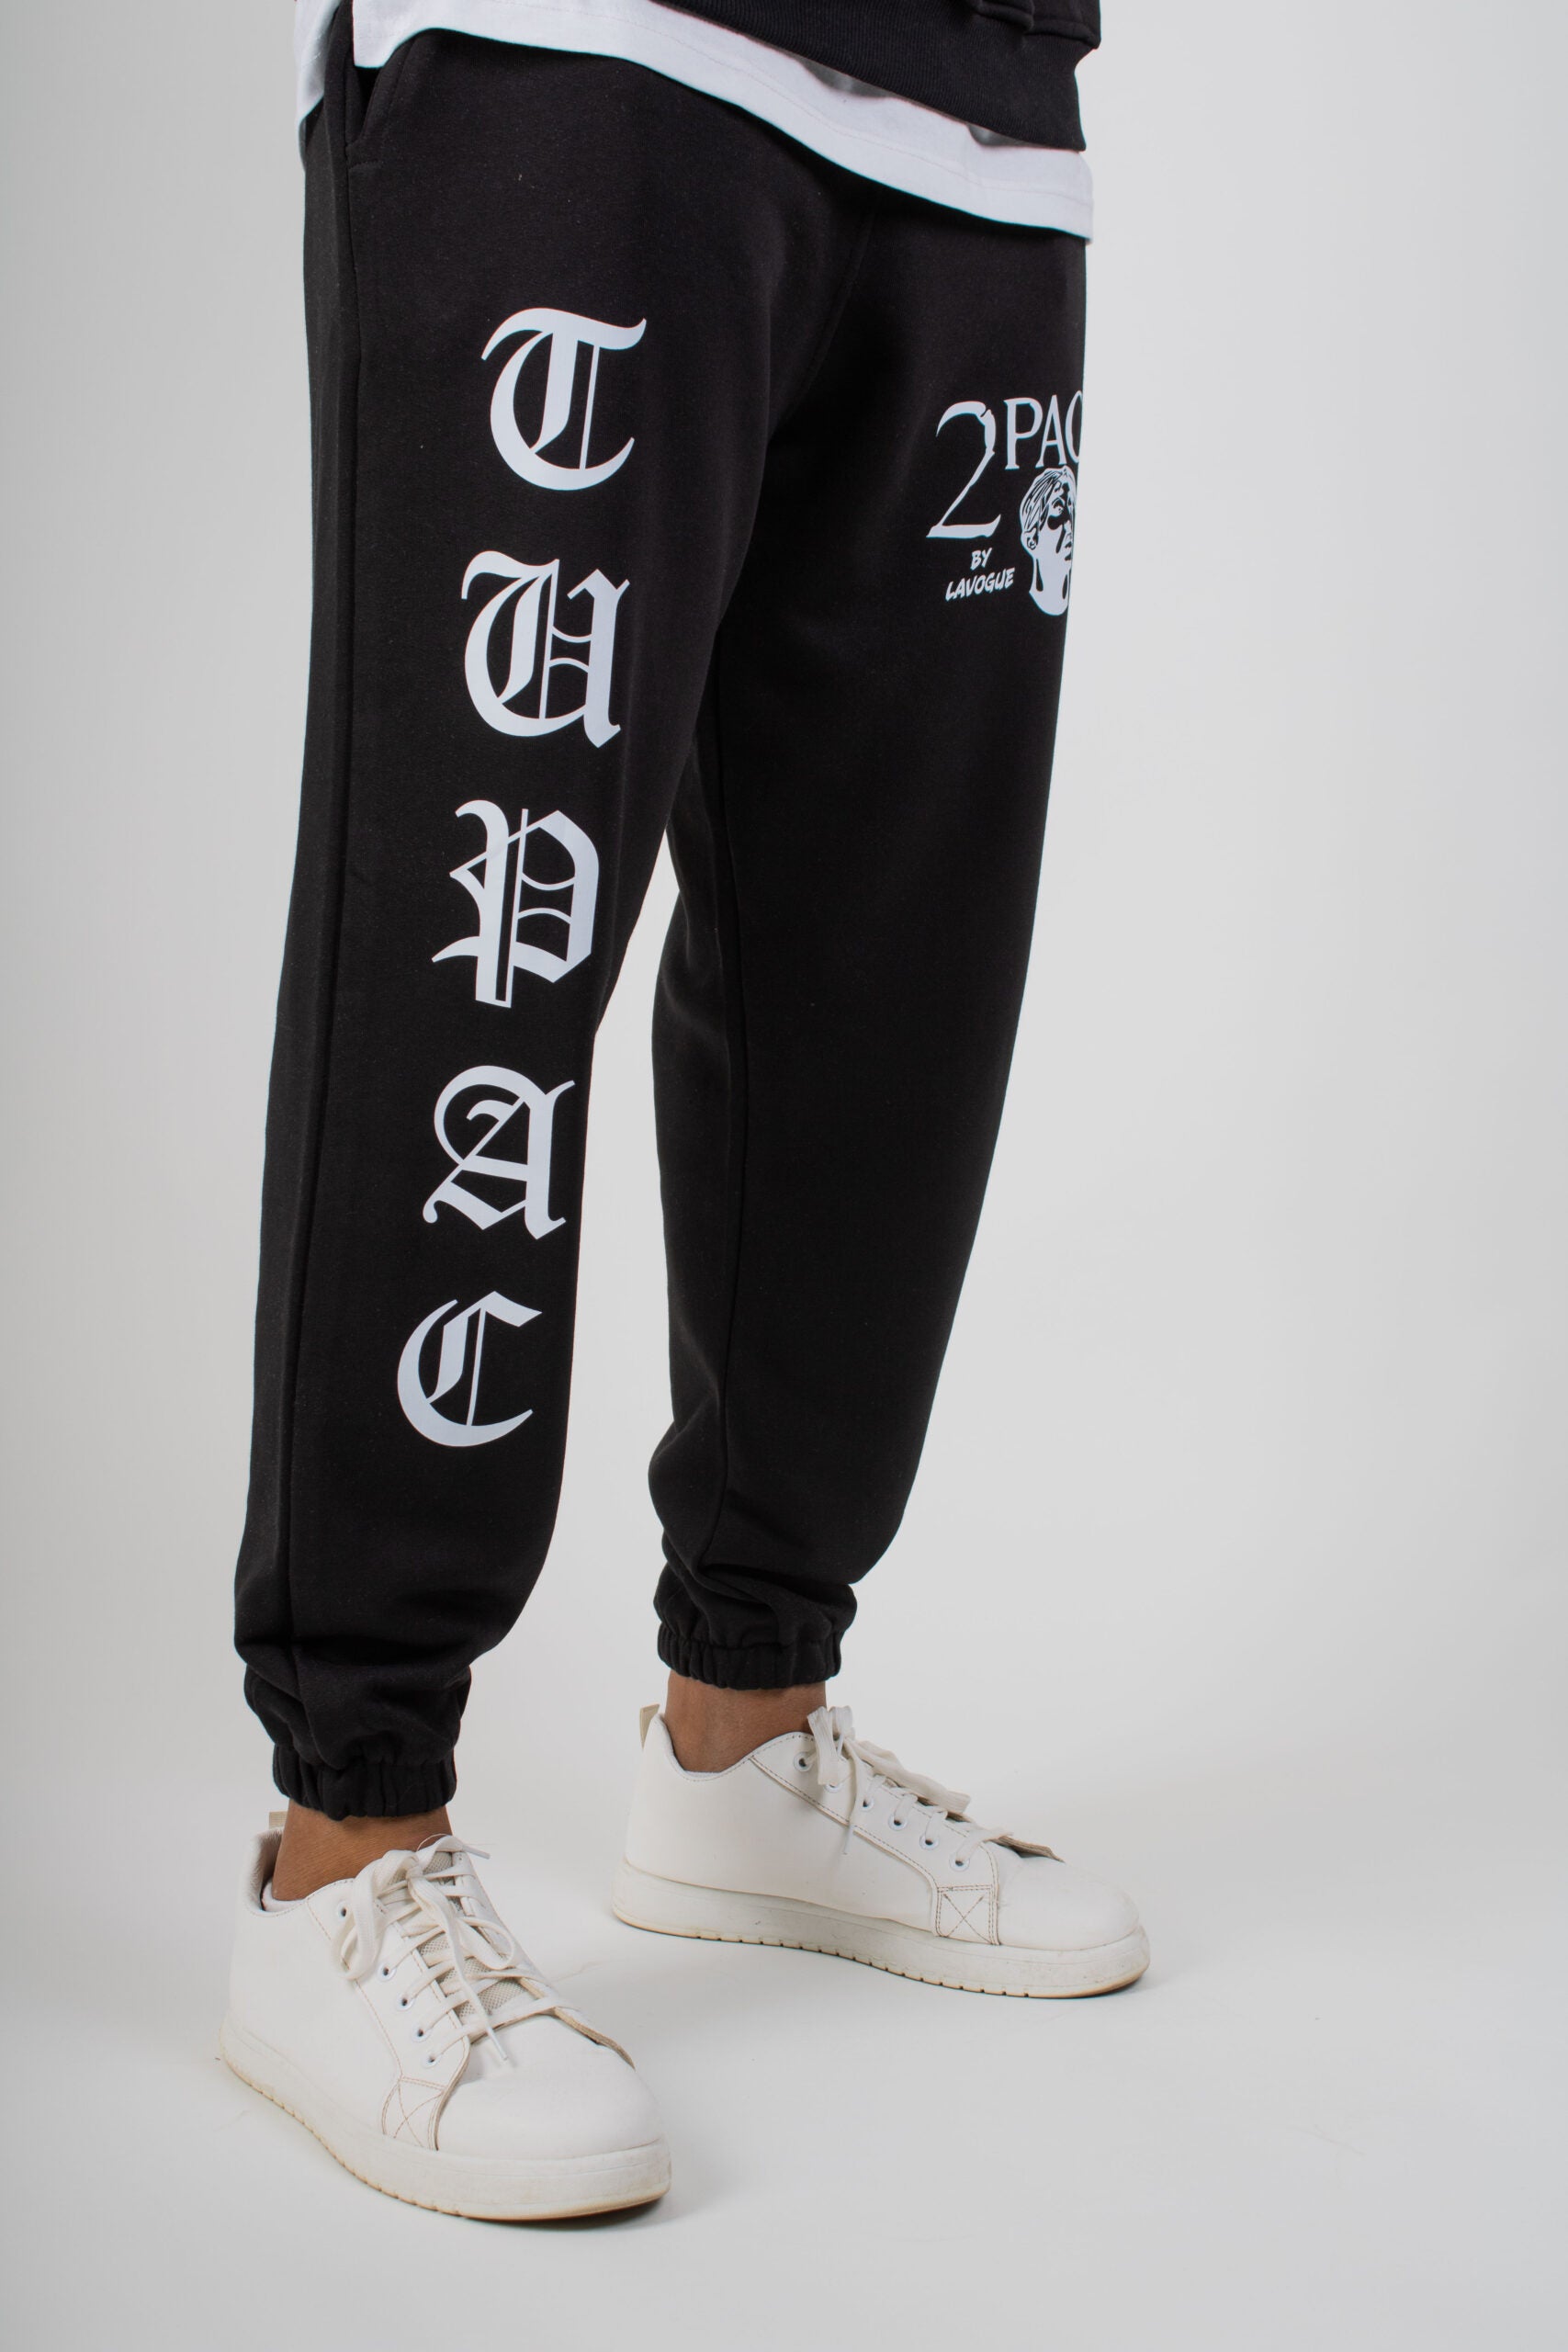 2PAC Joggers